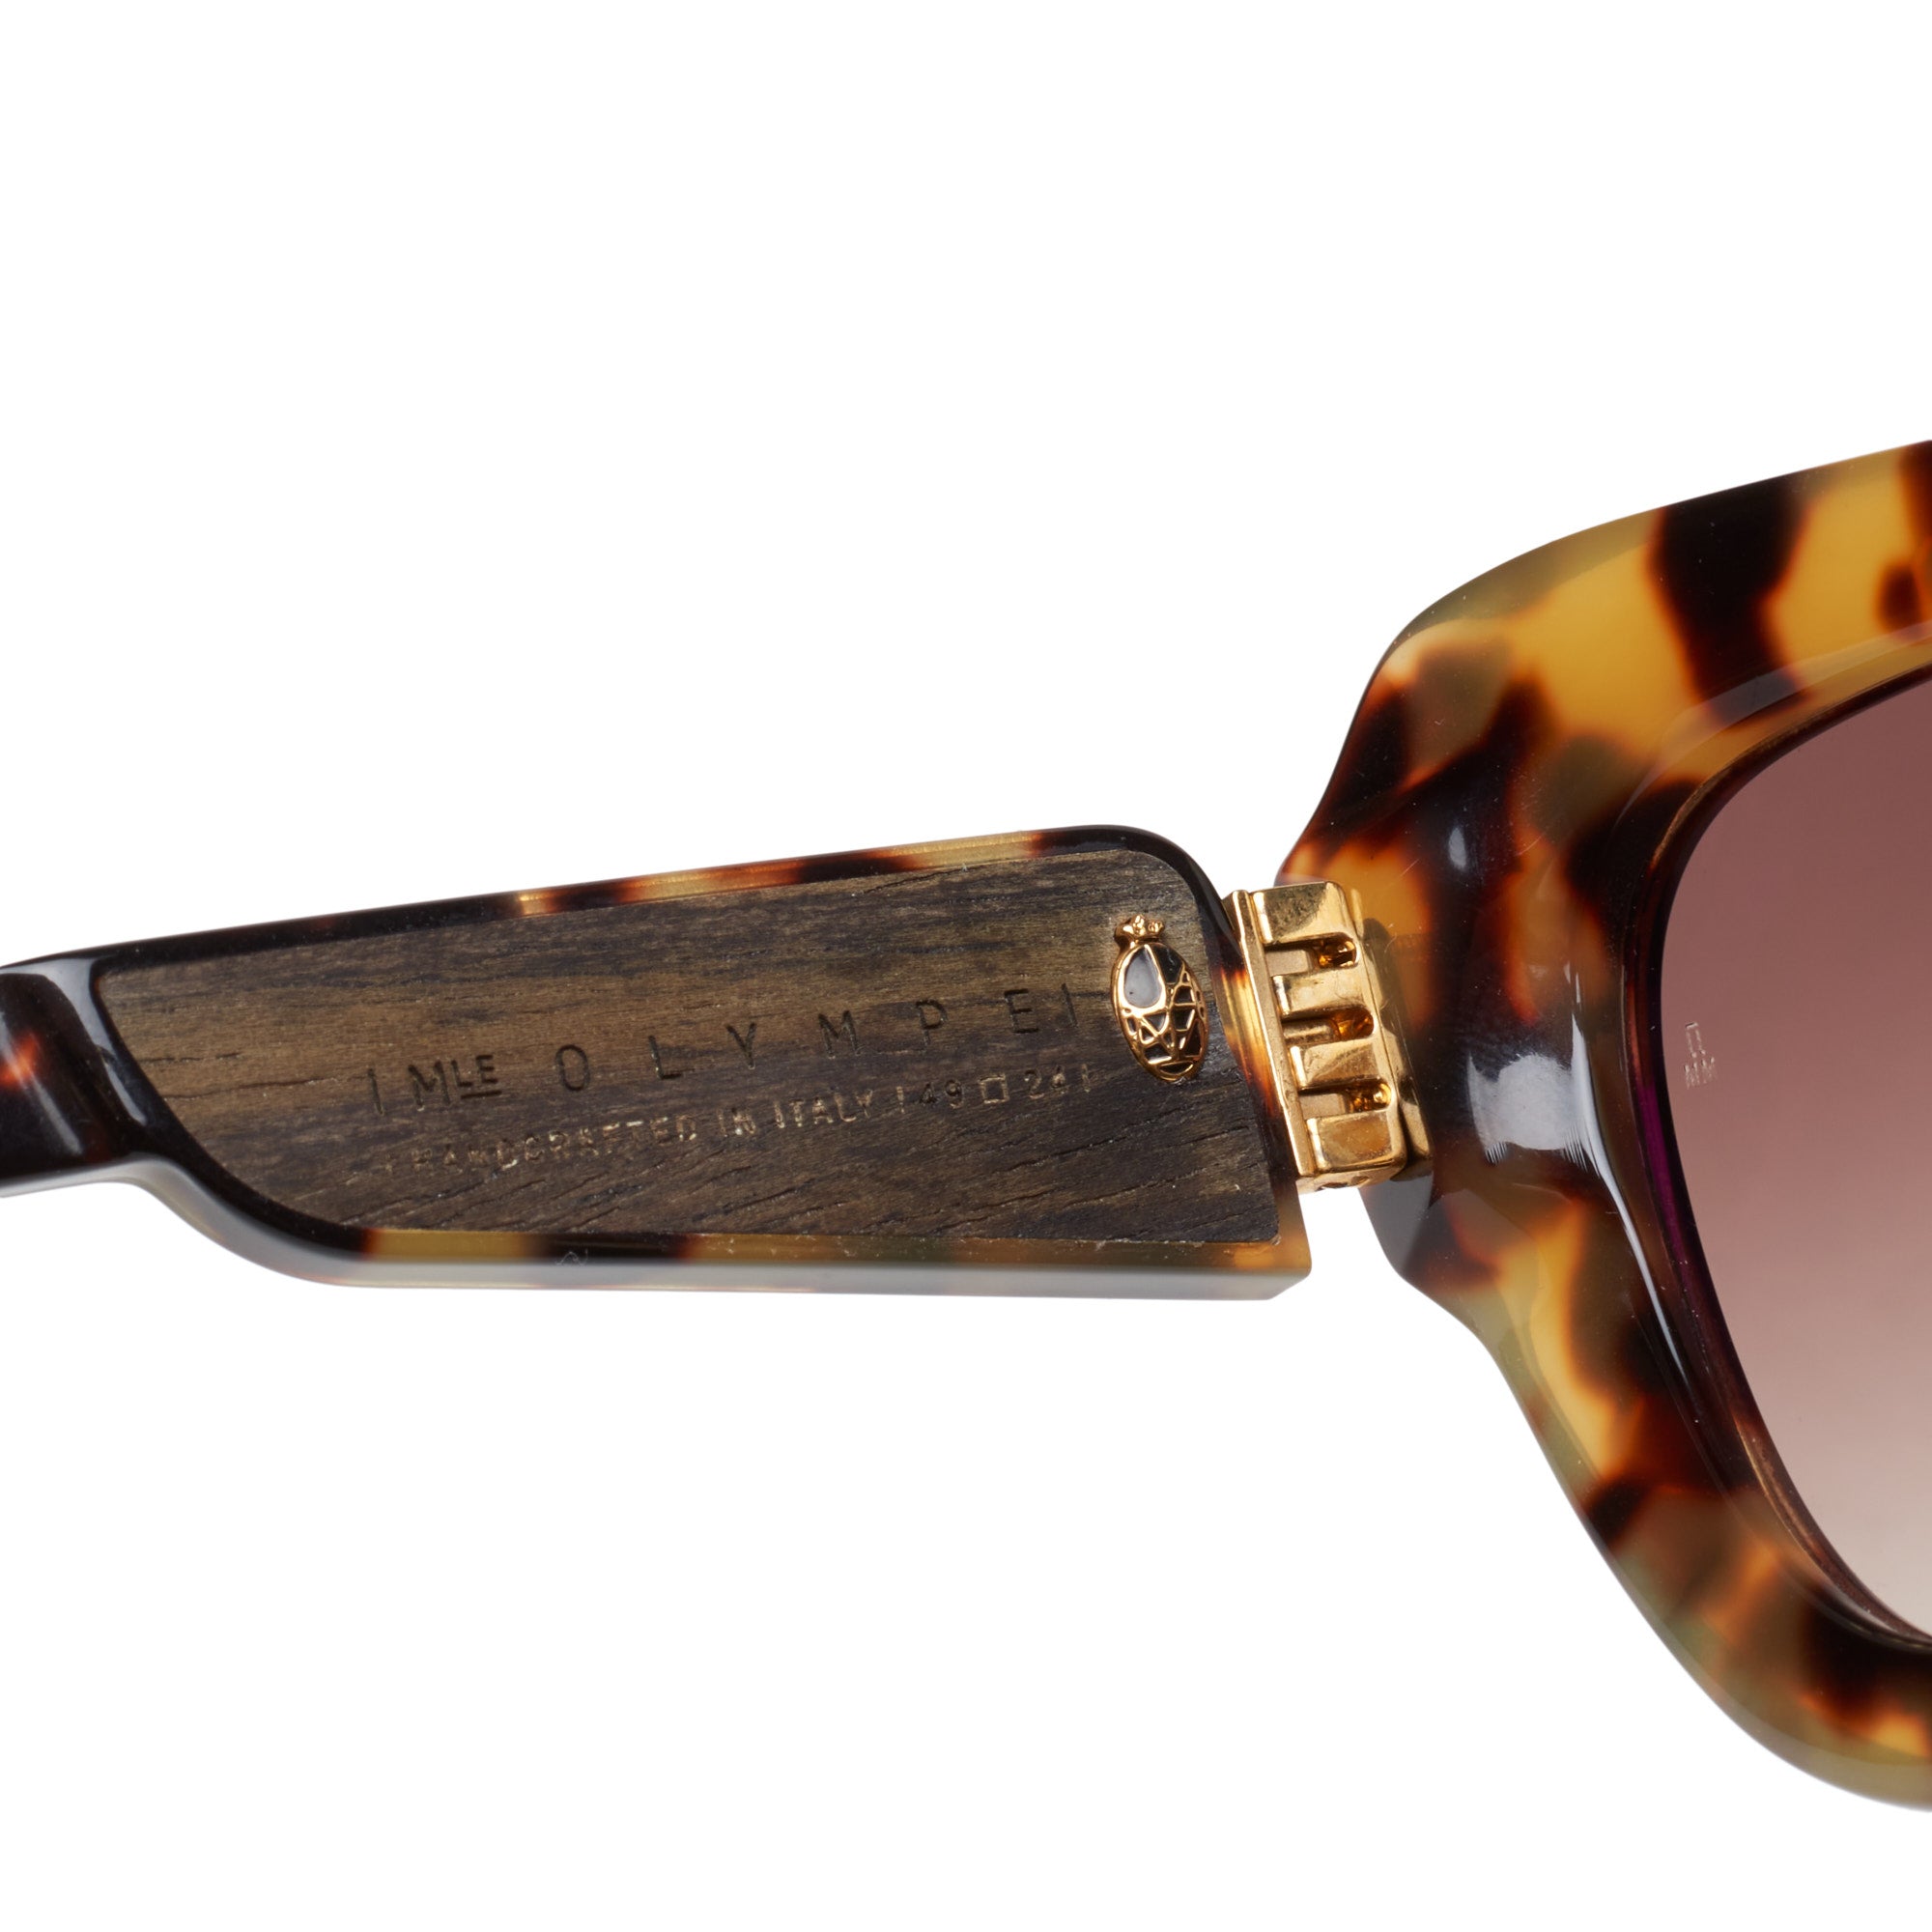 JACQUES MARIE MAGE "Olympe" JMMOL-03 Limited Edition 41/100 Sunglasses NEW JACQUES MARIE MAGE